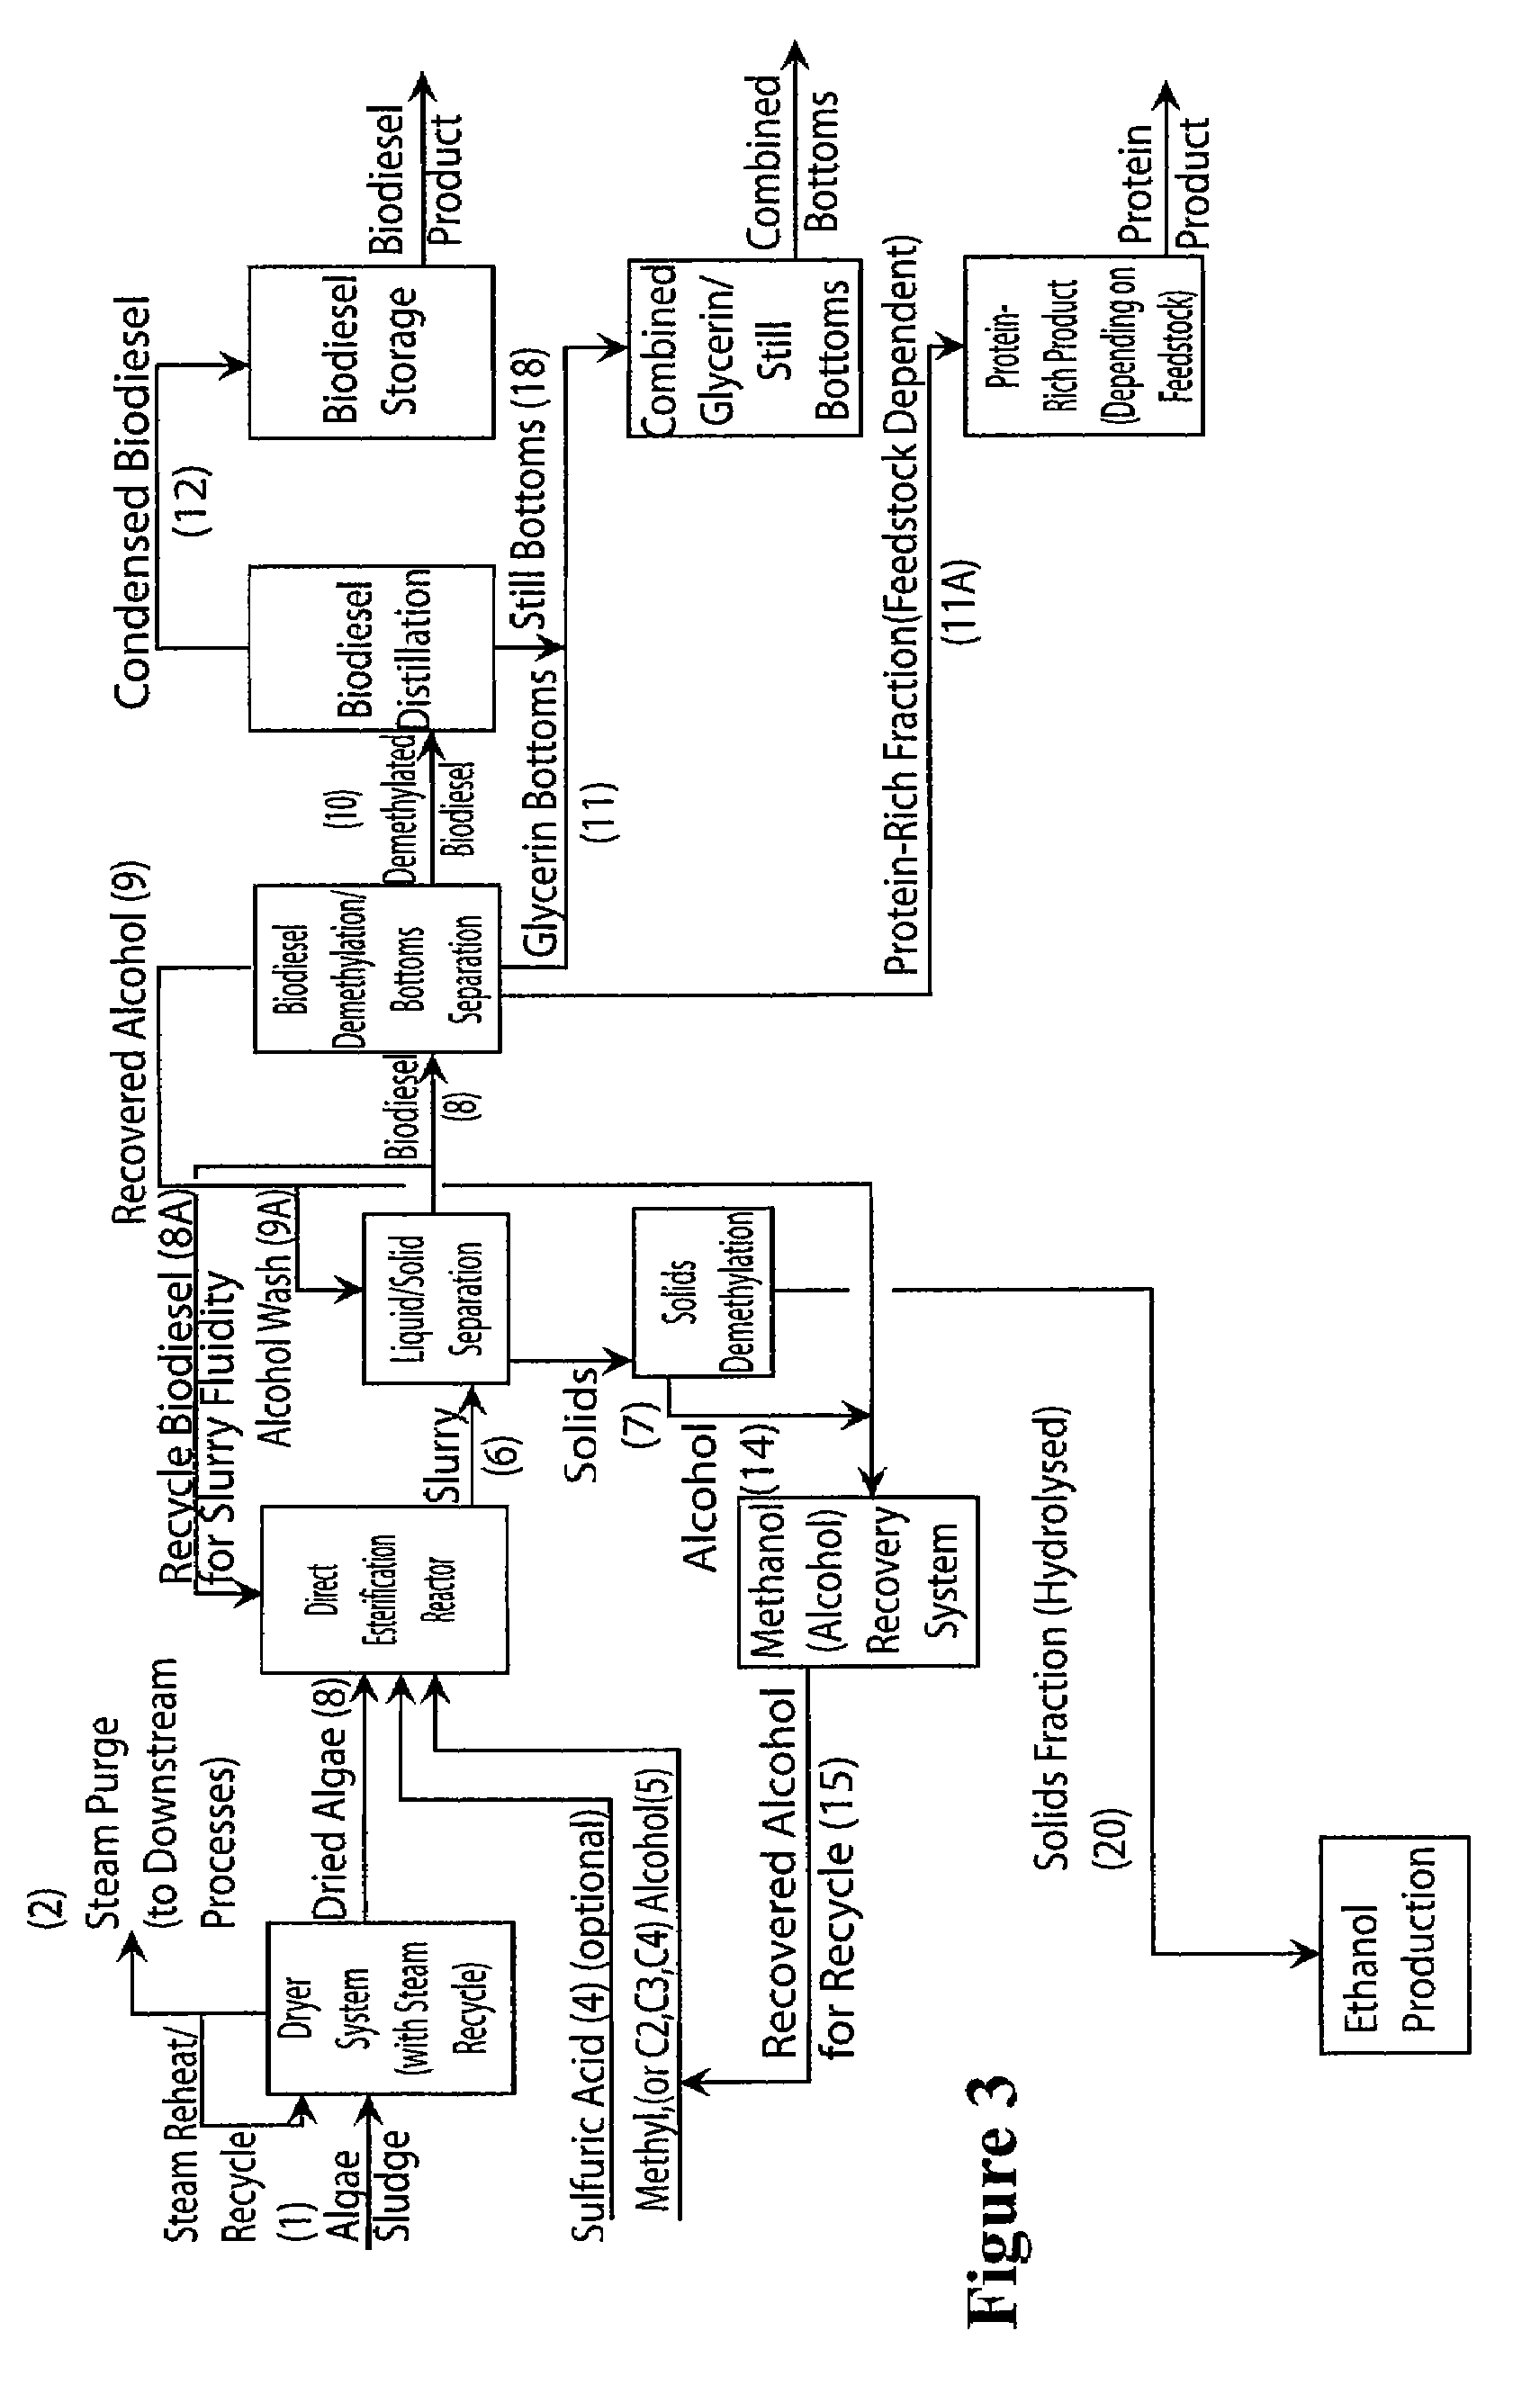 Method for conversion of oil-containing algae to 1,3-propanediol